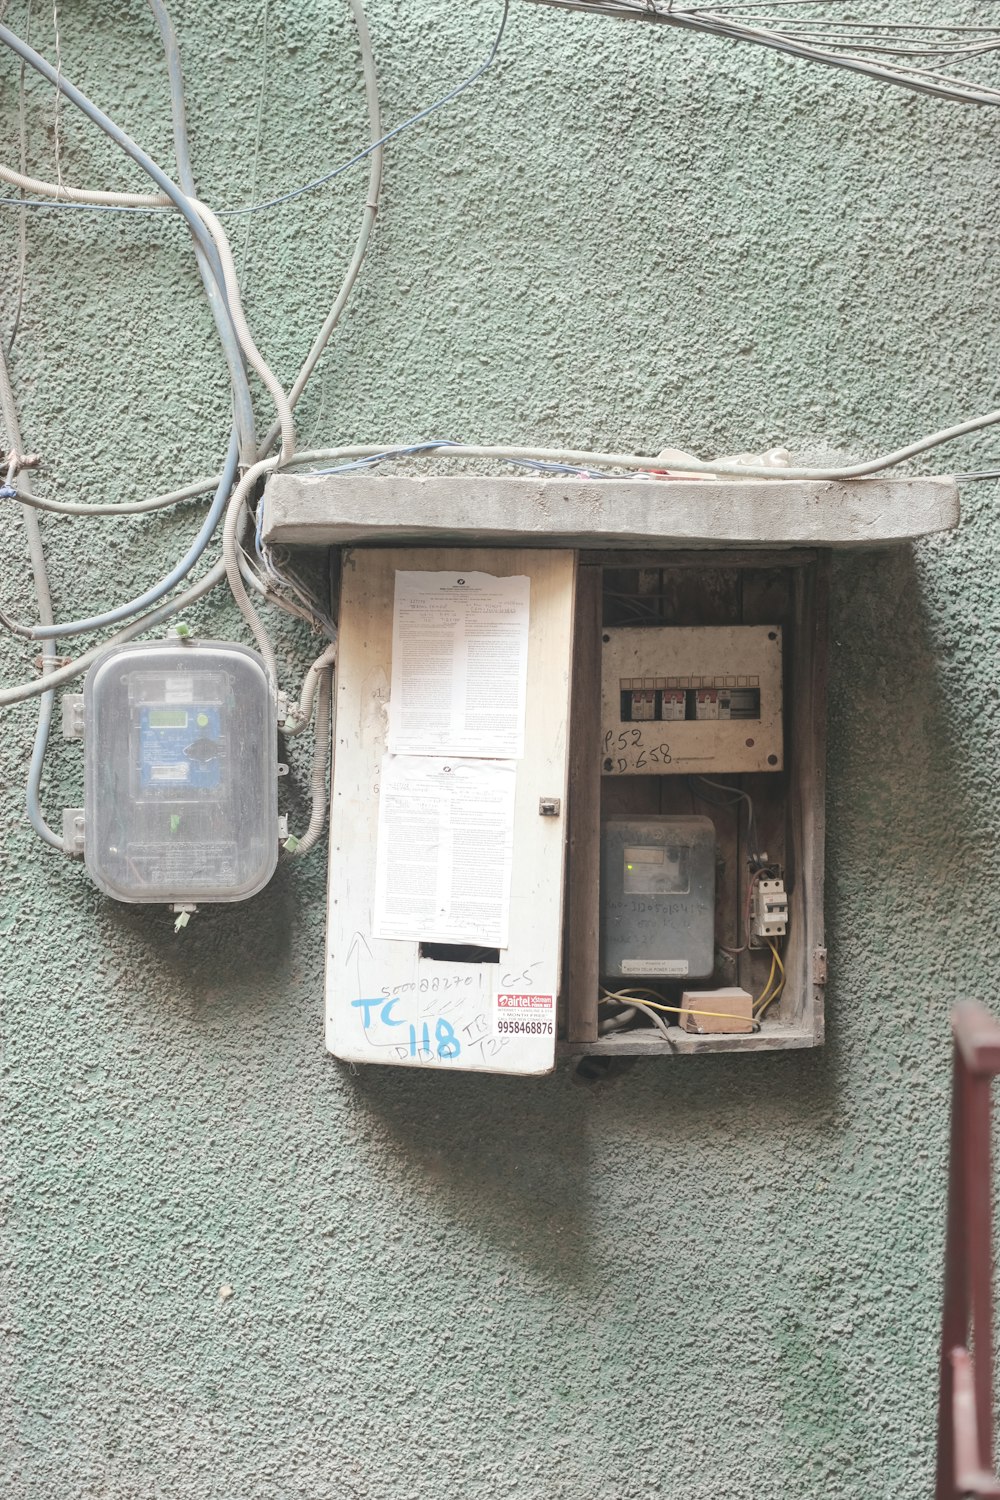 an electrical box attached to the side of a building